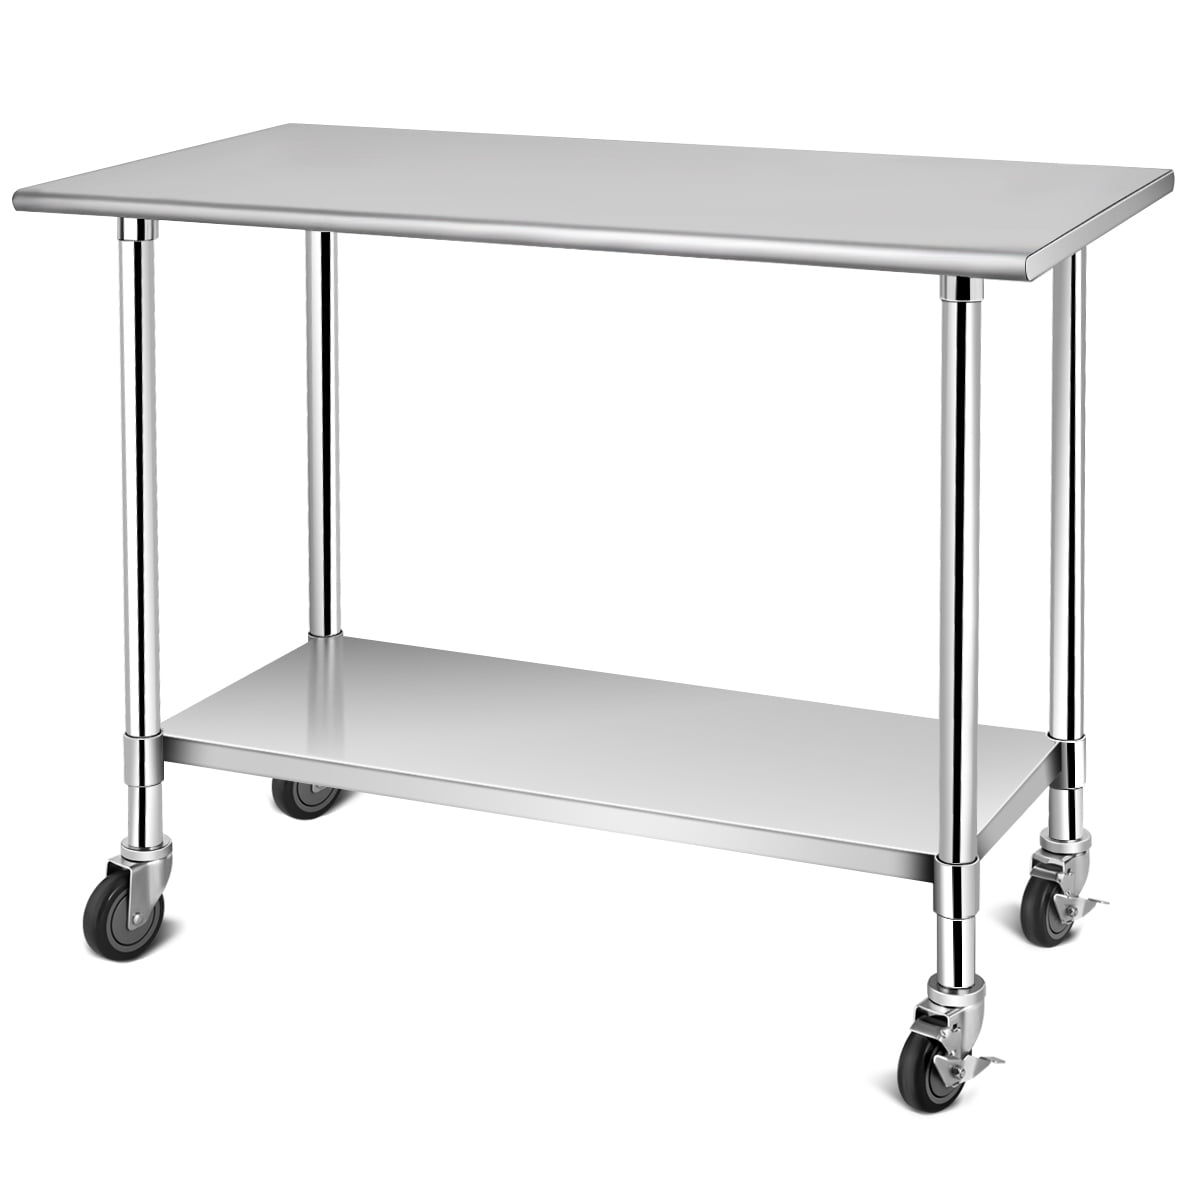 Costway 48'' x 24'' NSF Stainless Steel Commercial Kitchen Work Table w ...